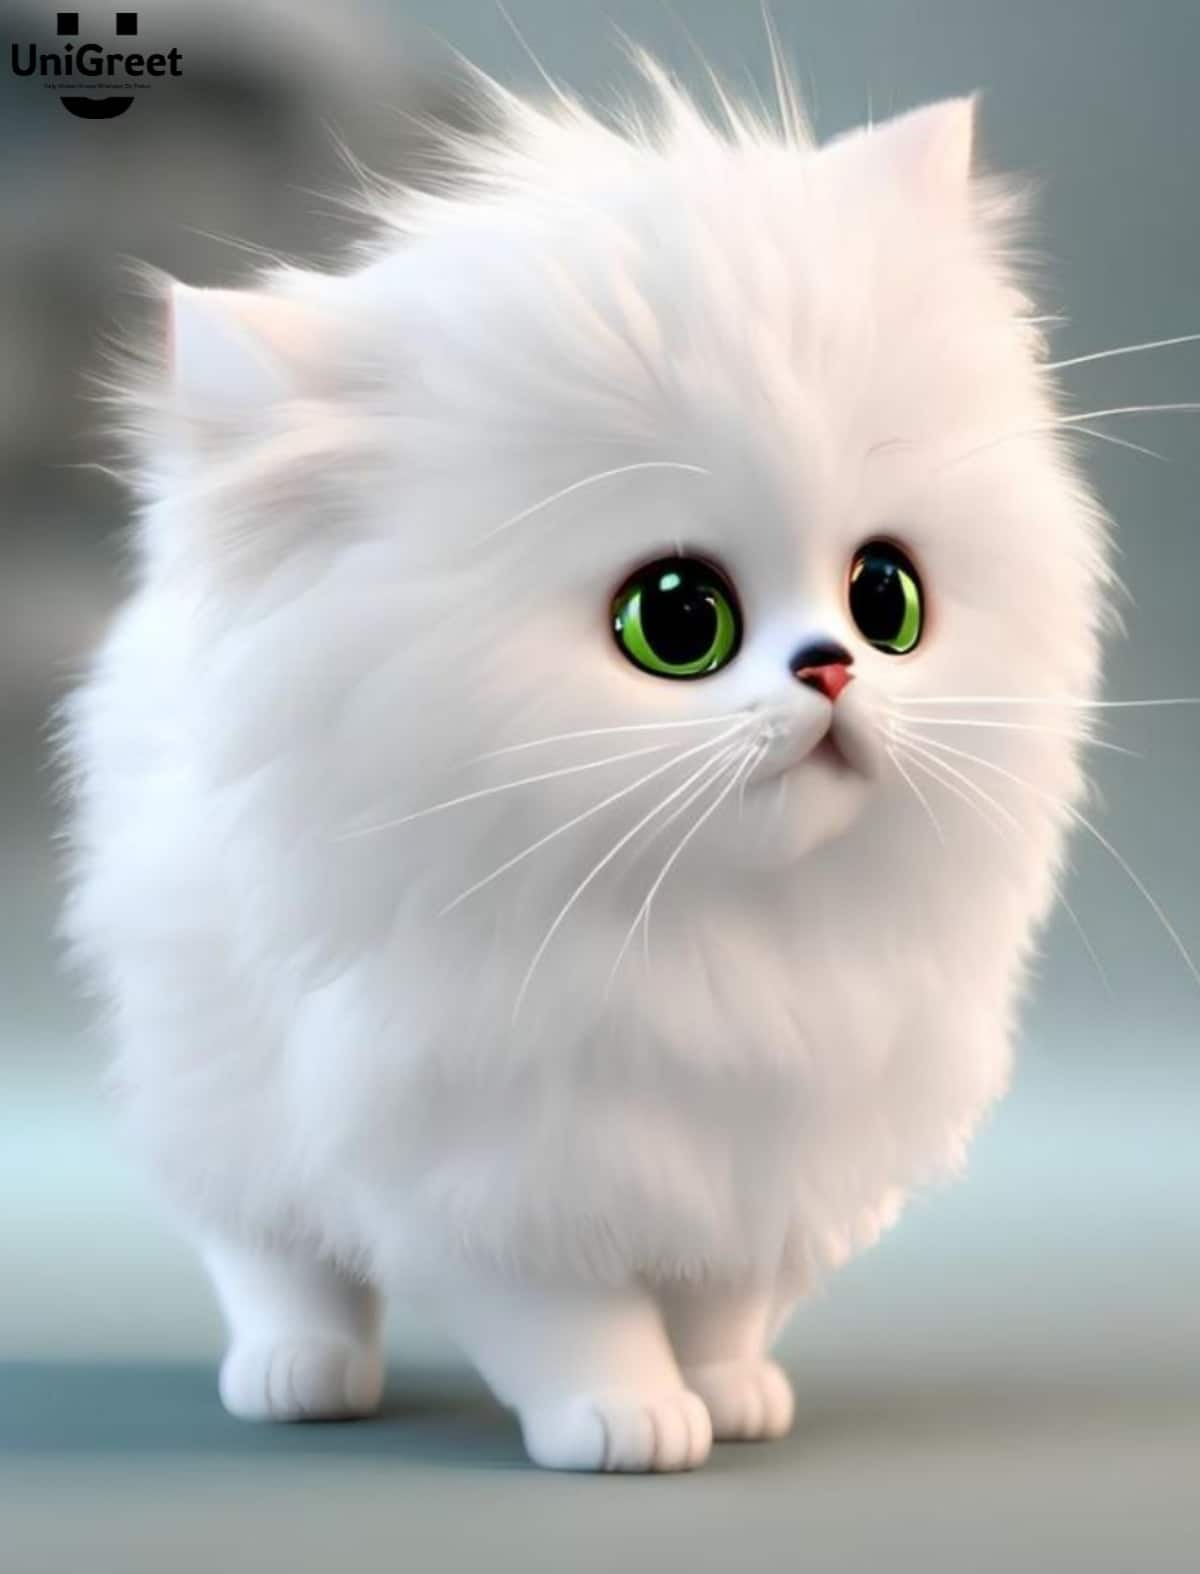 Astonishing Compilation of Over 999 Adorable 4K Images for Display Pictures